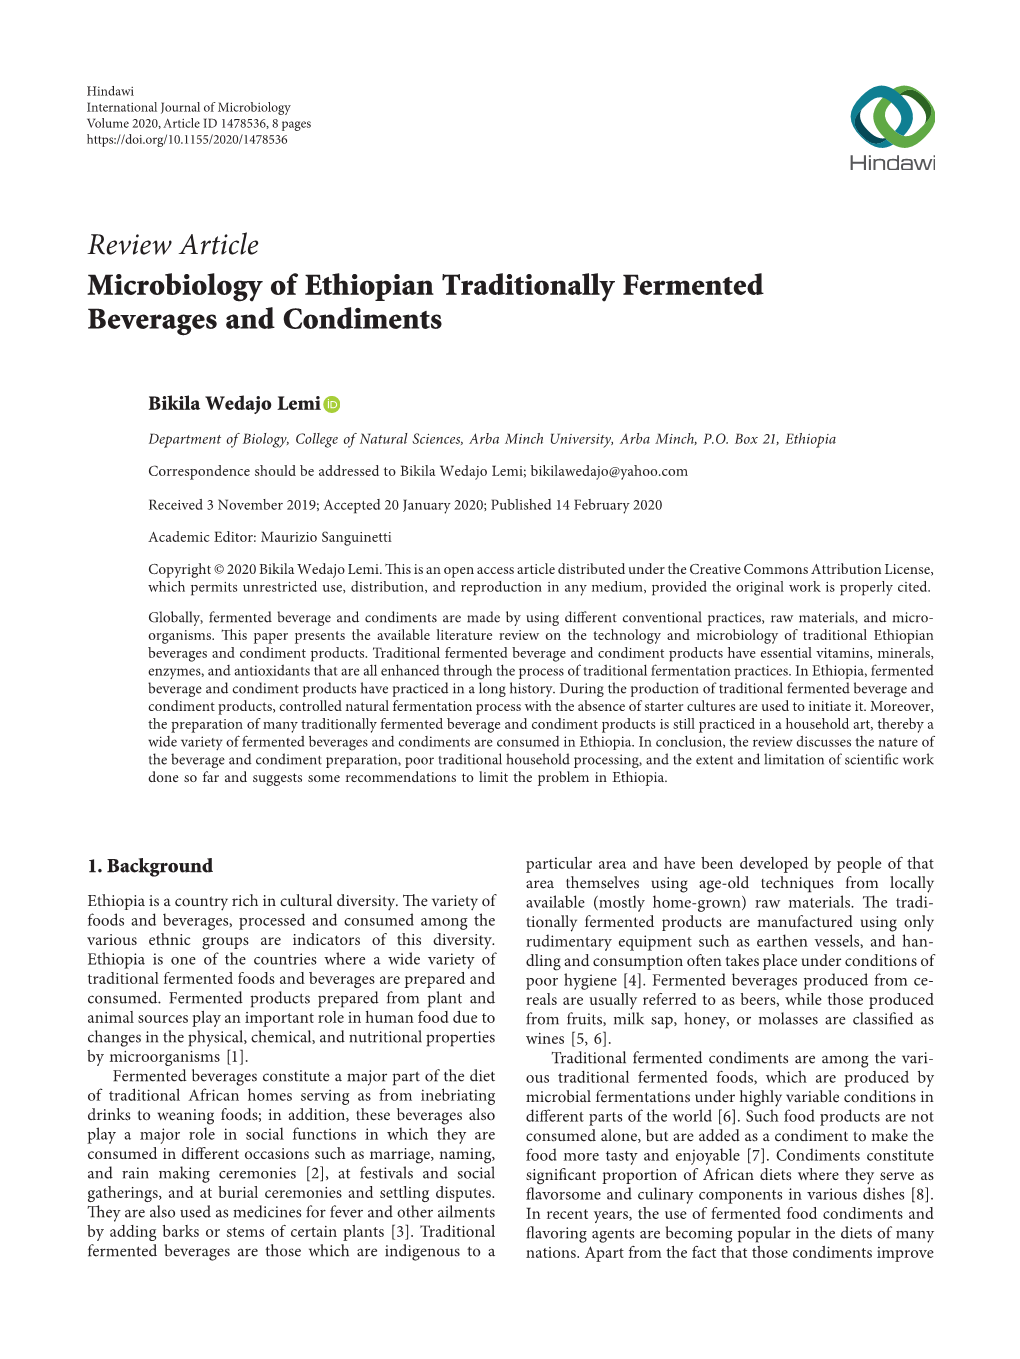 Review Article Microbiology of Ethiopian Traditionally Fermented Beverages and Condiments